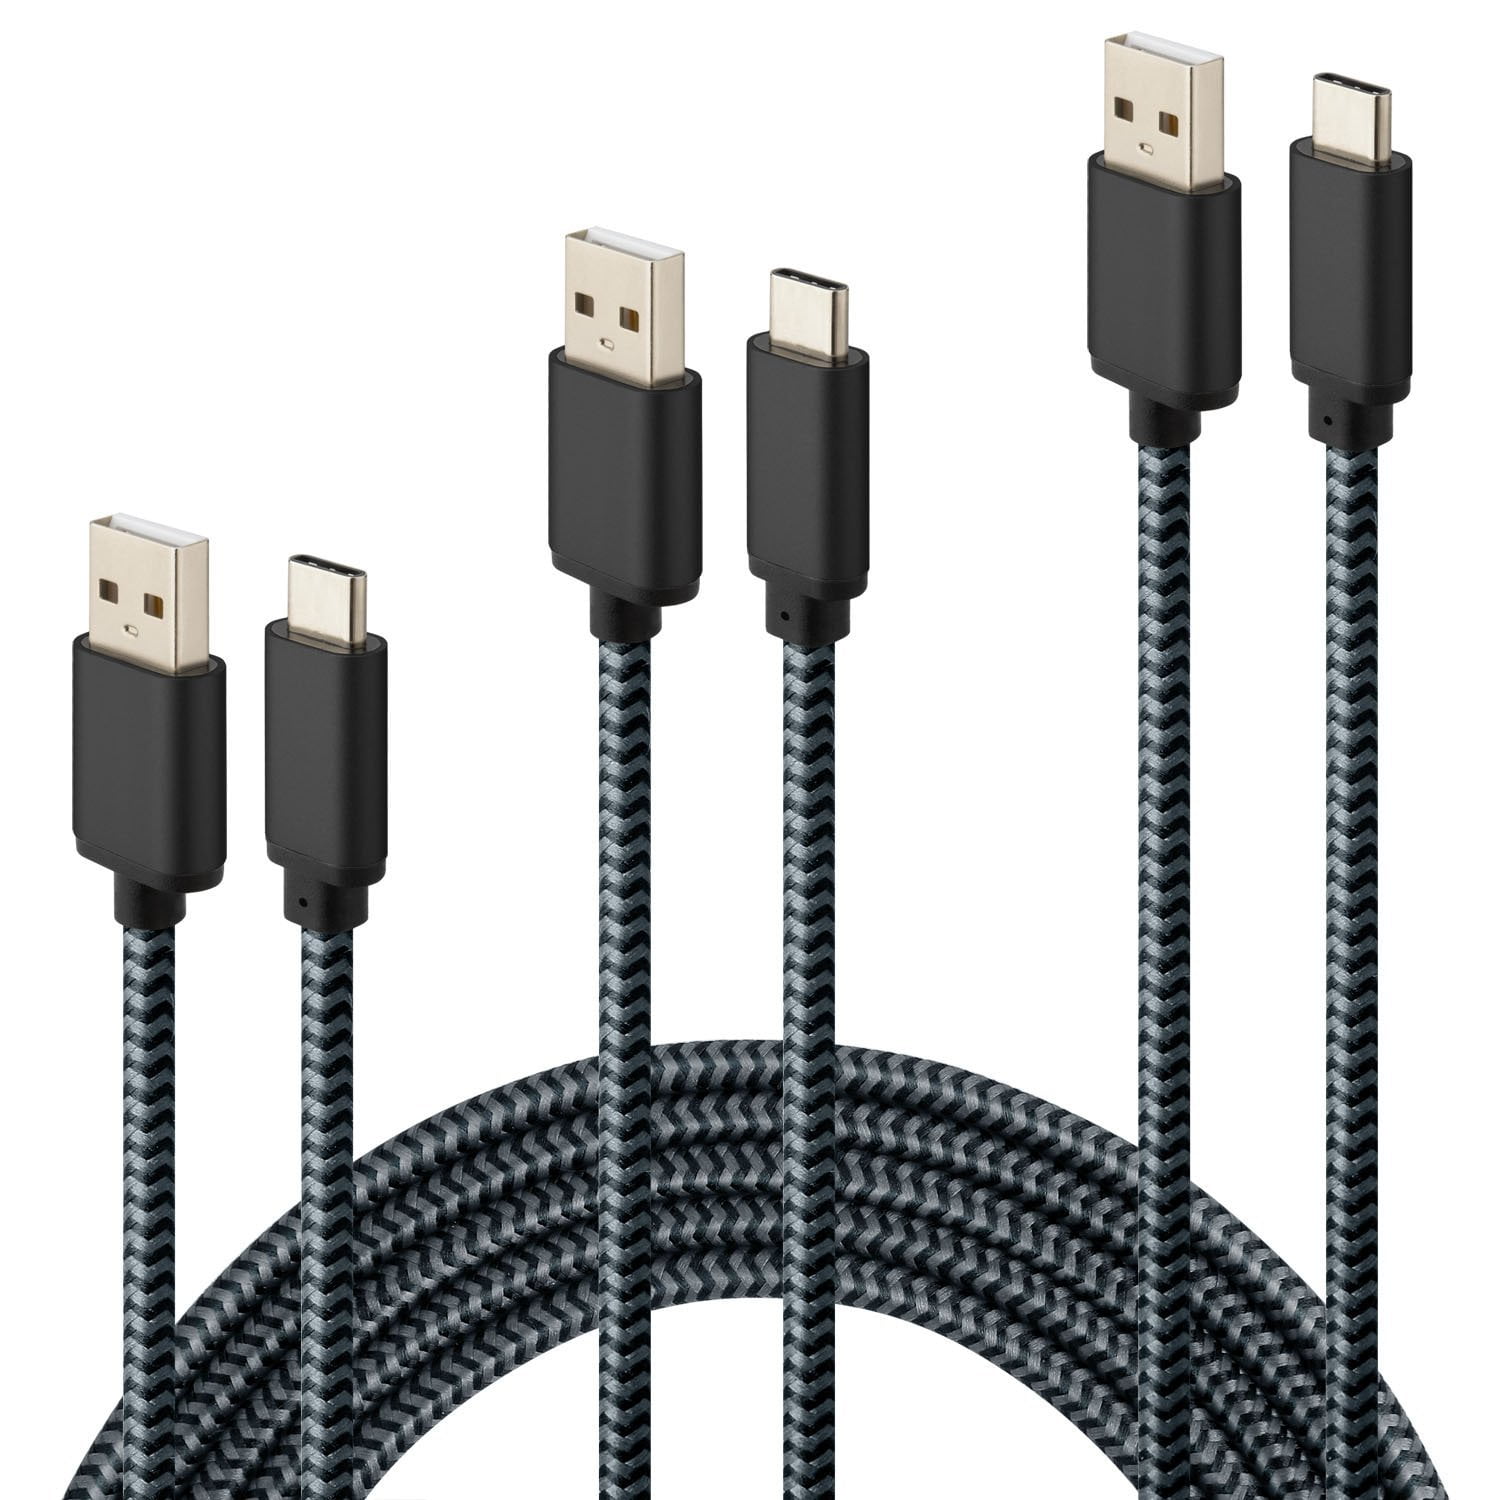 LG G6G7 Moto G6 Play sdfghj 5Pack 3FT 2x6FT 2x10FT Nylon Braided USB C Charger Cable Fast Charging Cord Compatible Samsung Galaxy S8 S9 Plus Note 9/8 USB Type C Cable Google Pixel XL 3/3 XL